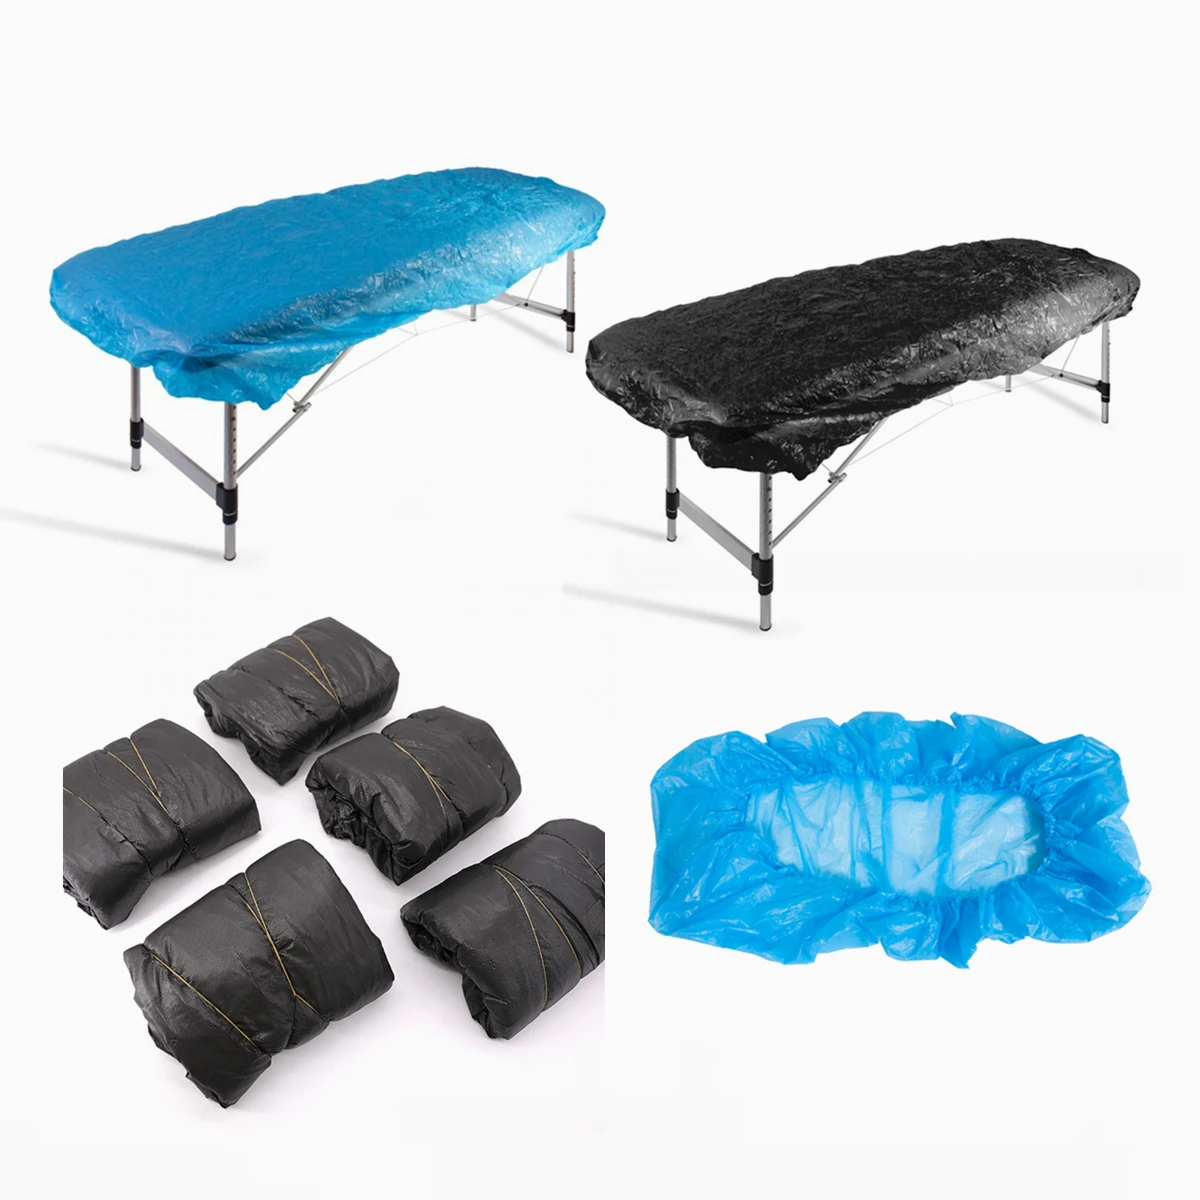 Disposable Tattoo Bed Sheet Black Chair Cover Waterproof Dustproof Makeup Supplies Covers 10pcs